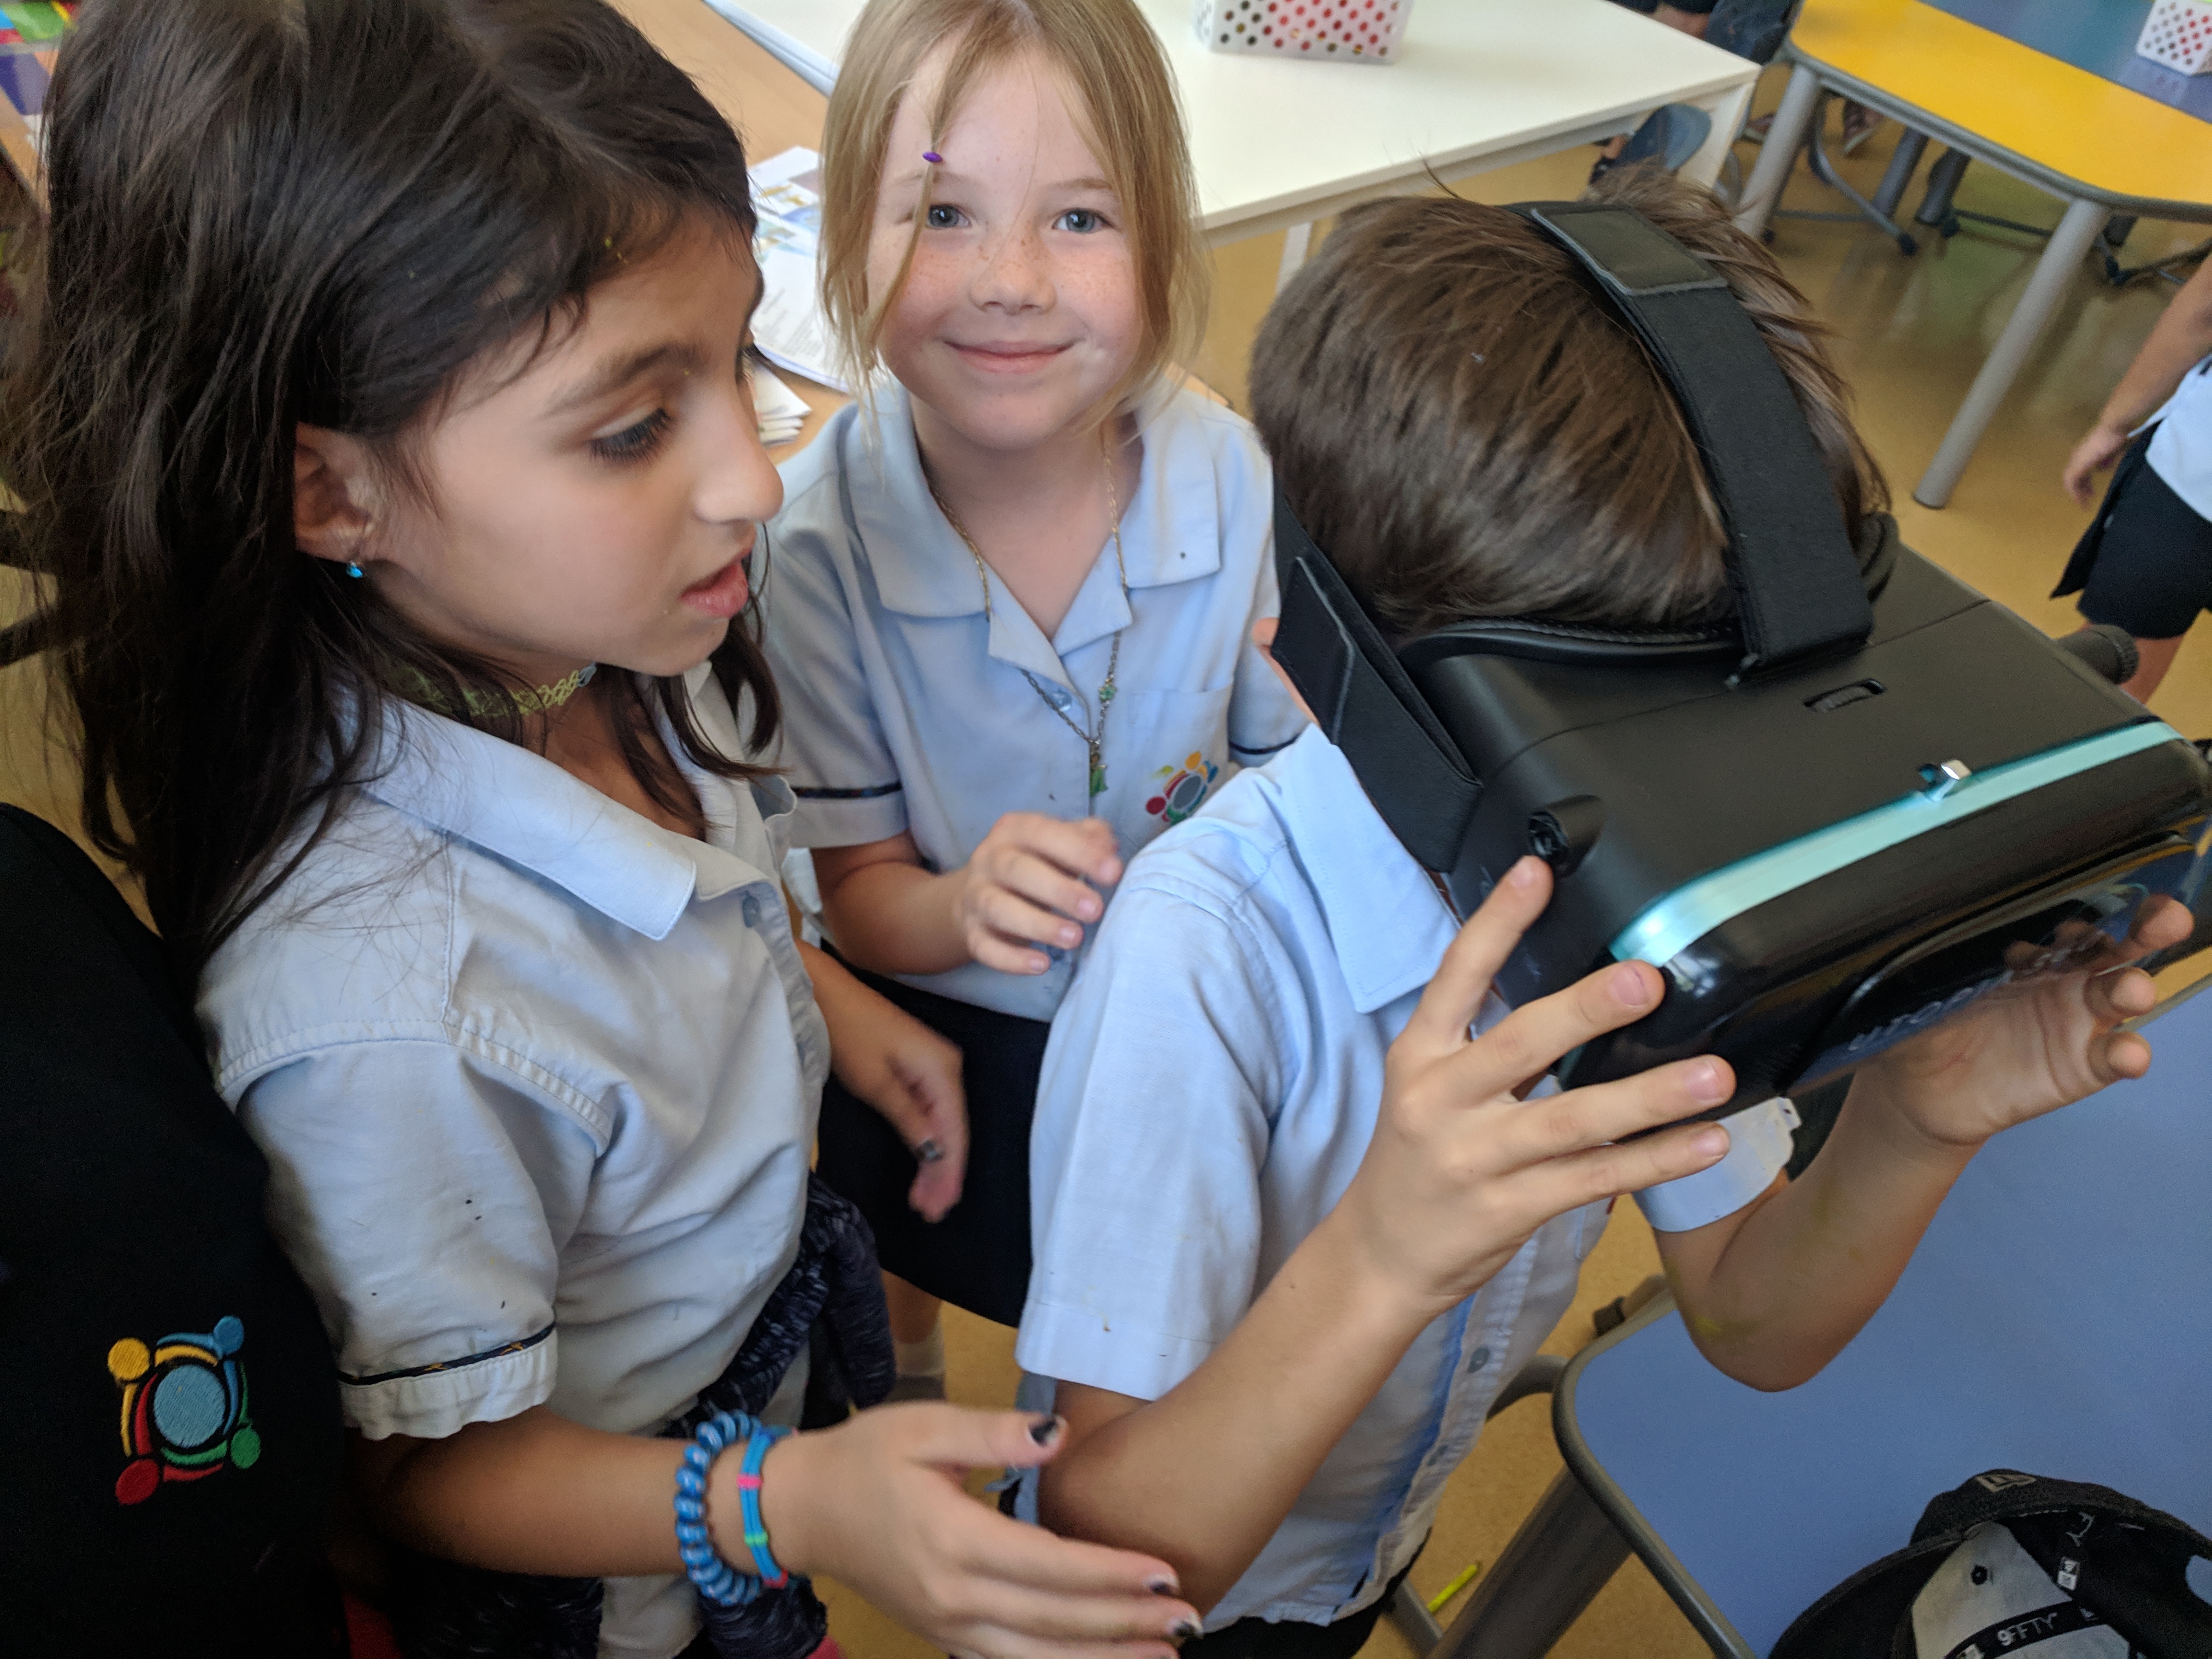 VR in the classroom